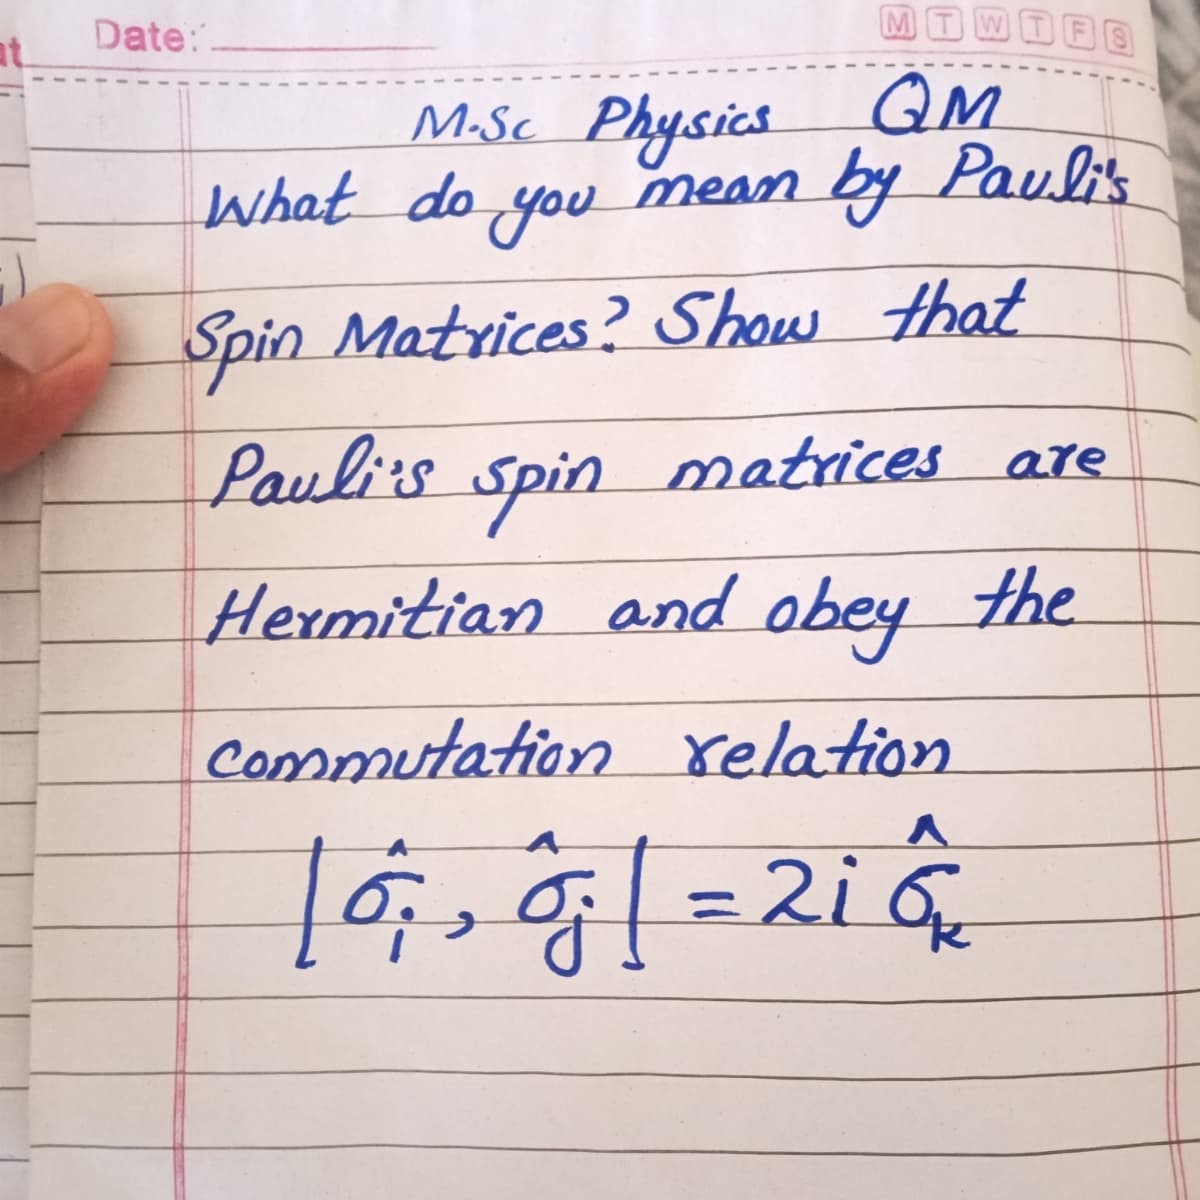 Date:
M.Sc. Physics QM
What do you mean by Pauli's
Spin
Matrices? Show that
Pauli's
matrices are
spin
Hermitian and obey the
Commutation relation
